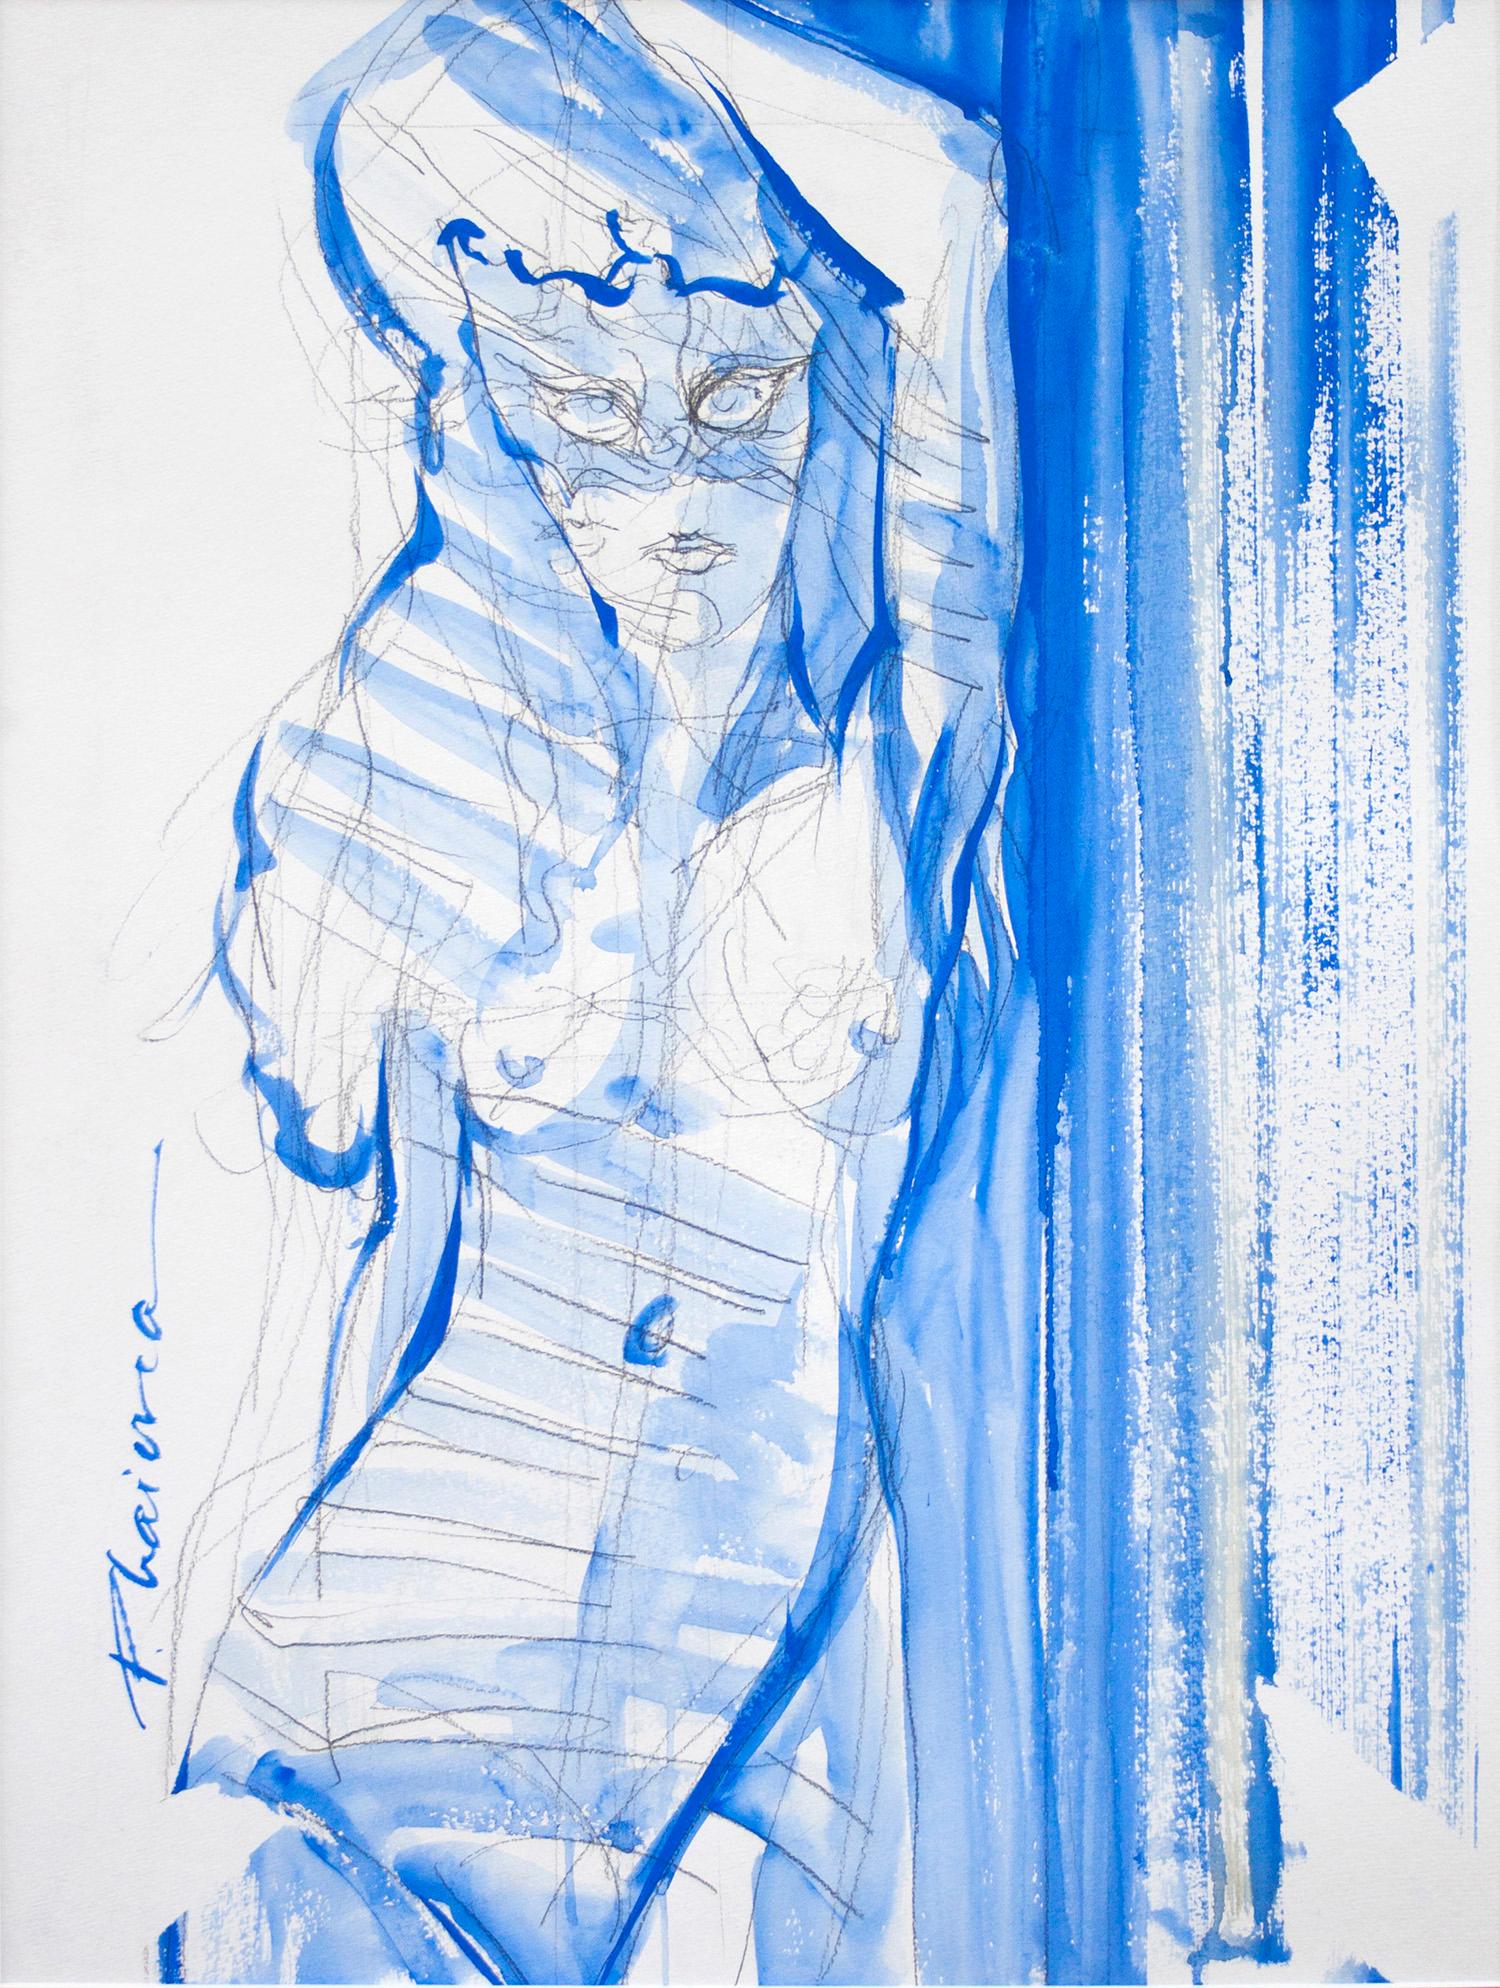 Masked Beauty in Blue , pencil and tempera on paper, inspired by Matisse.
Part of Nude in Interior series.
Shipped rolled in a tube, directly from the artist's studio.
See pictures, in mat and framed, as they were in the exhibition.

Artist